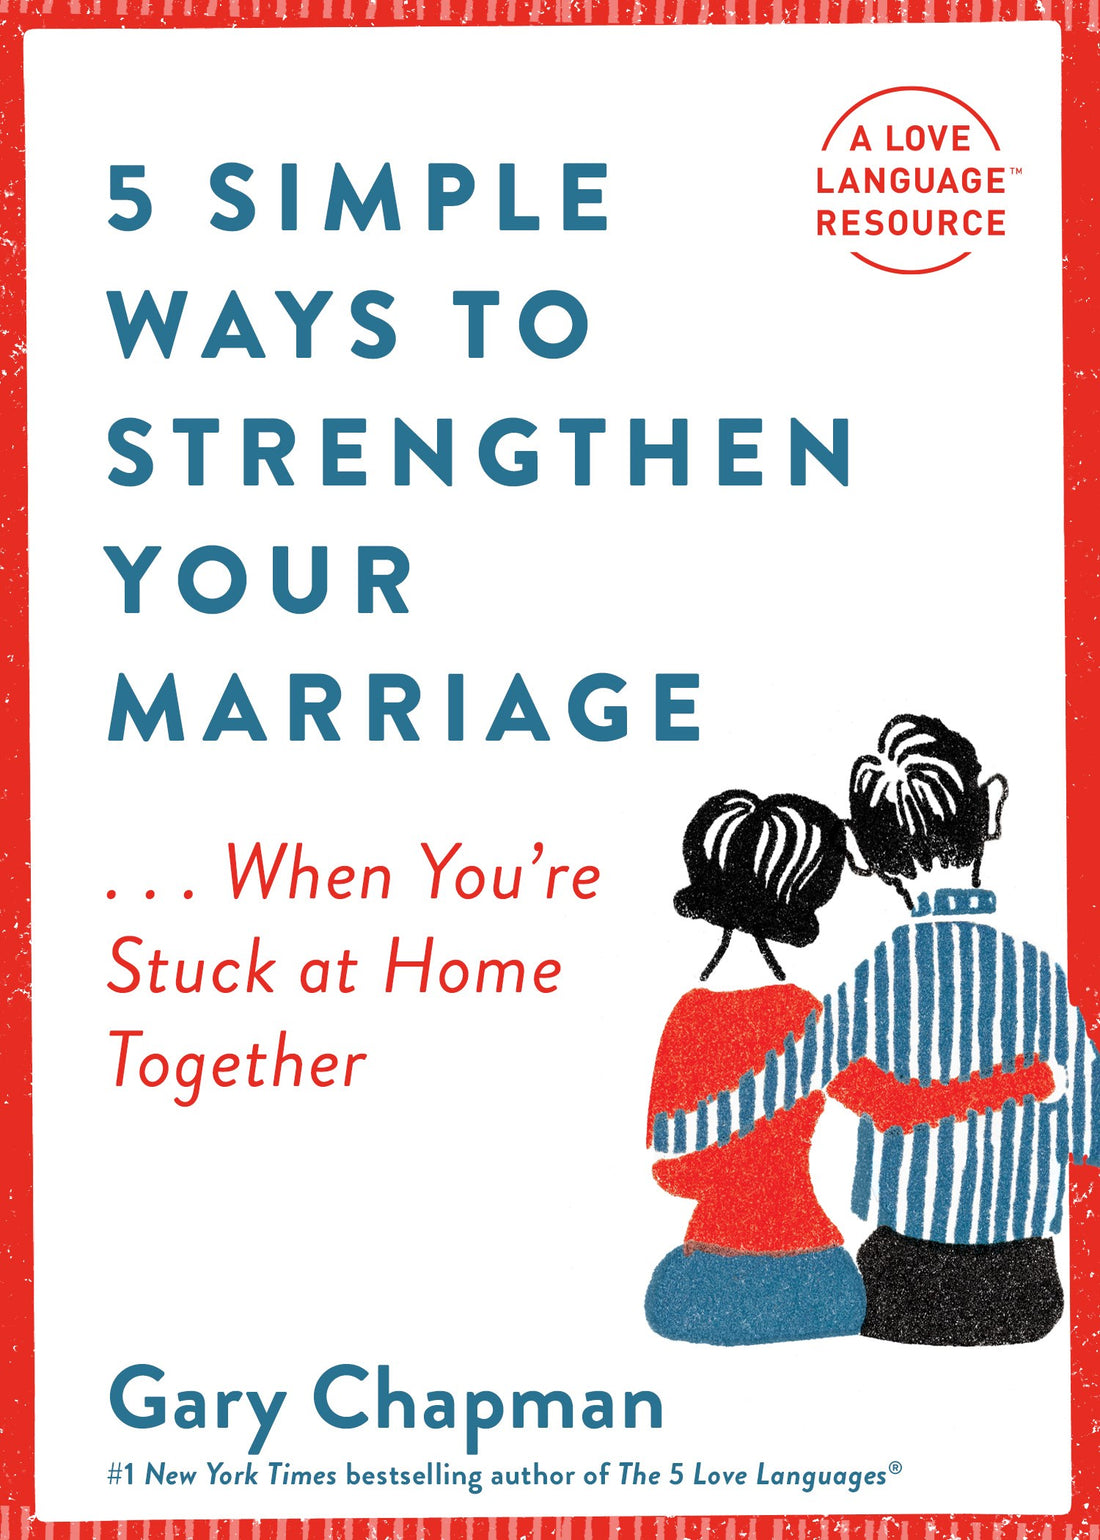 Seed of Abraham Christian Bookstore - Gary Chapman - 5 Simple Ways To Strengthen Your Marriage